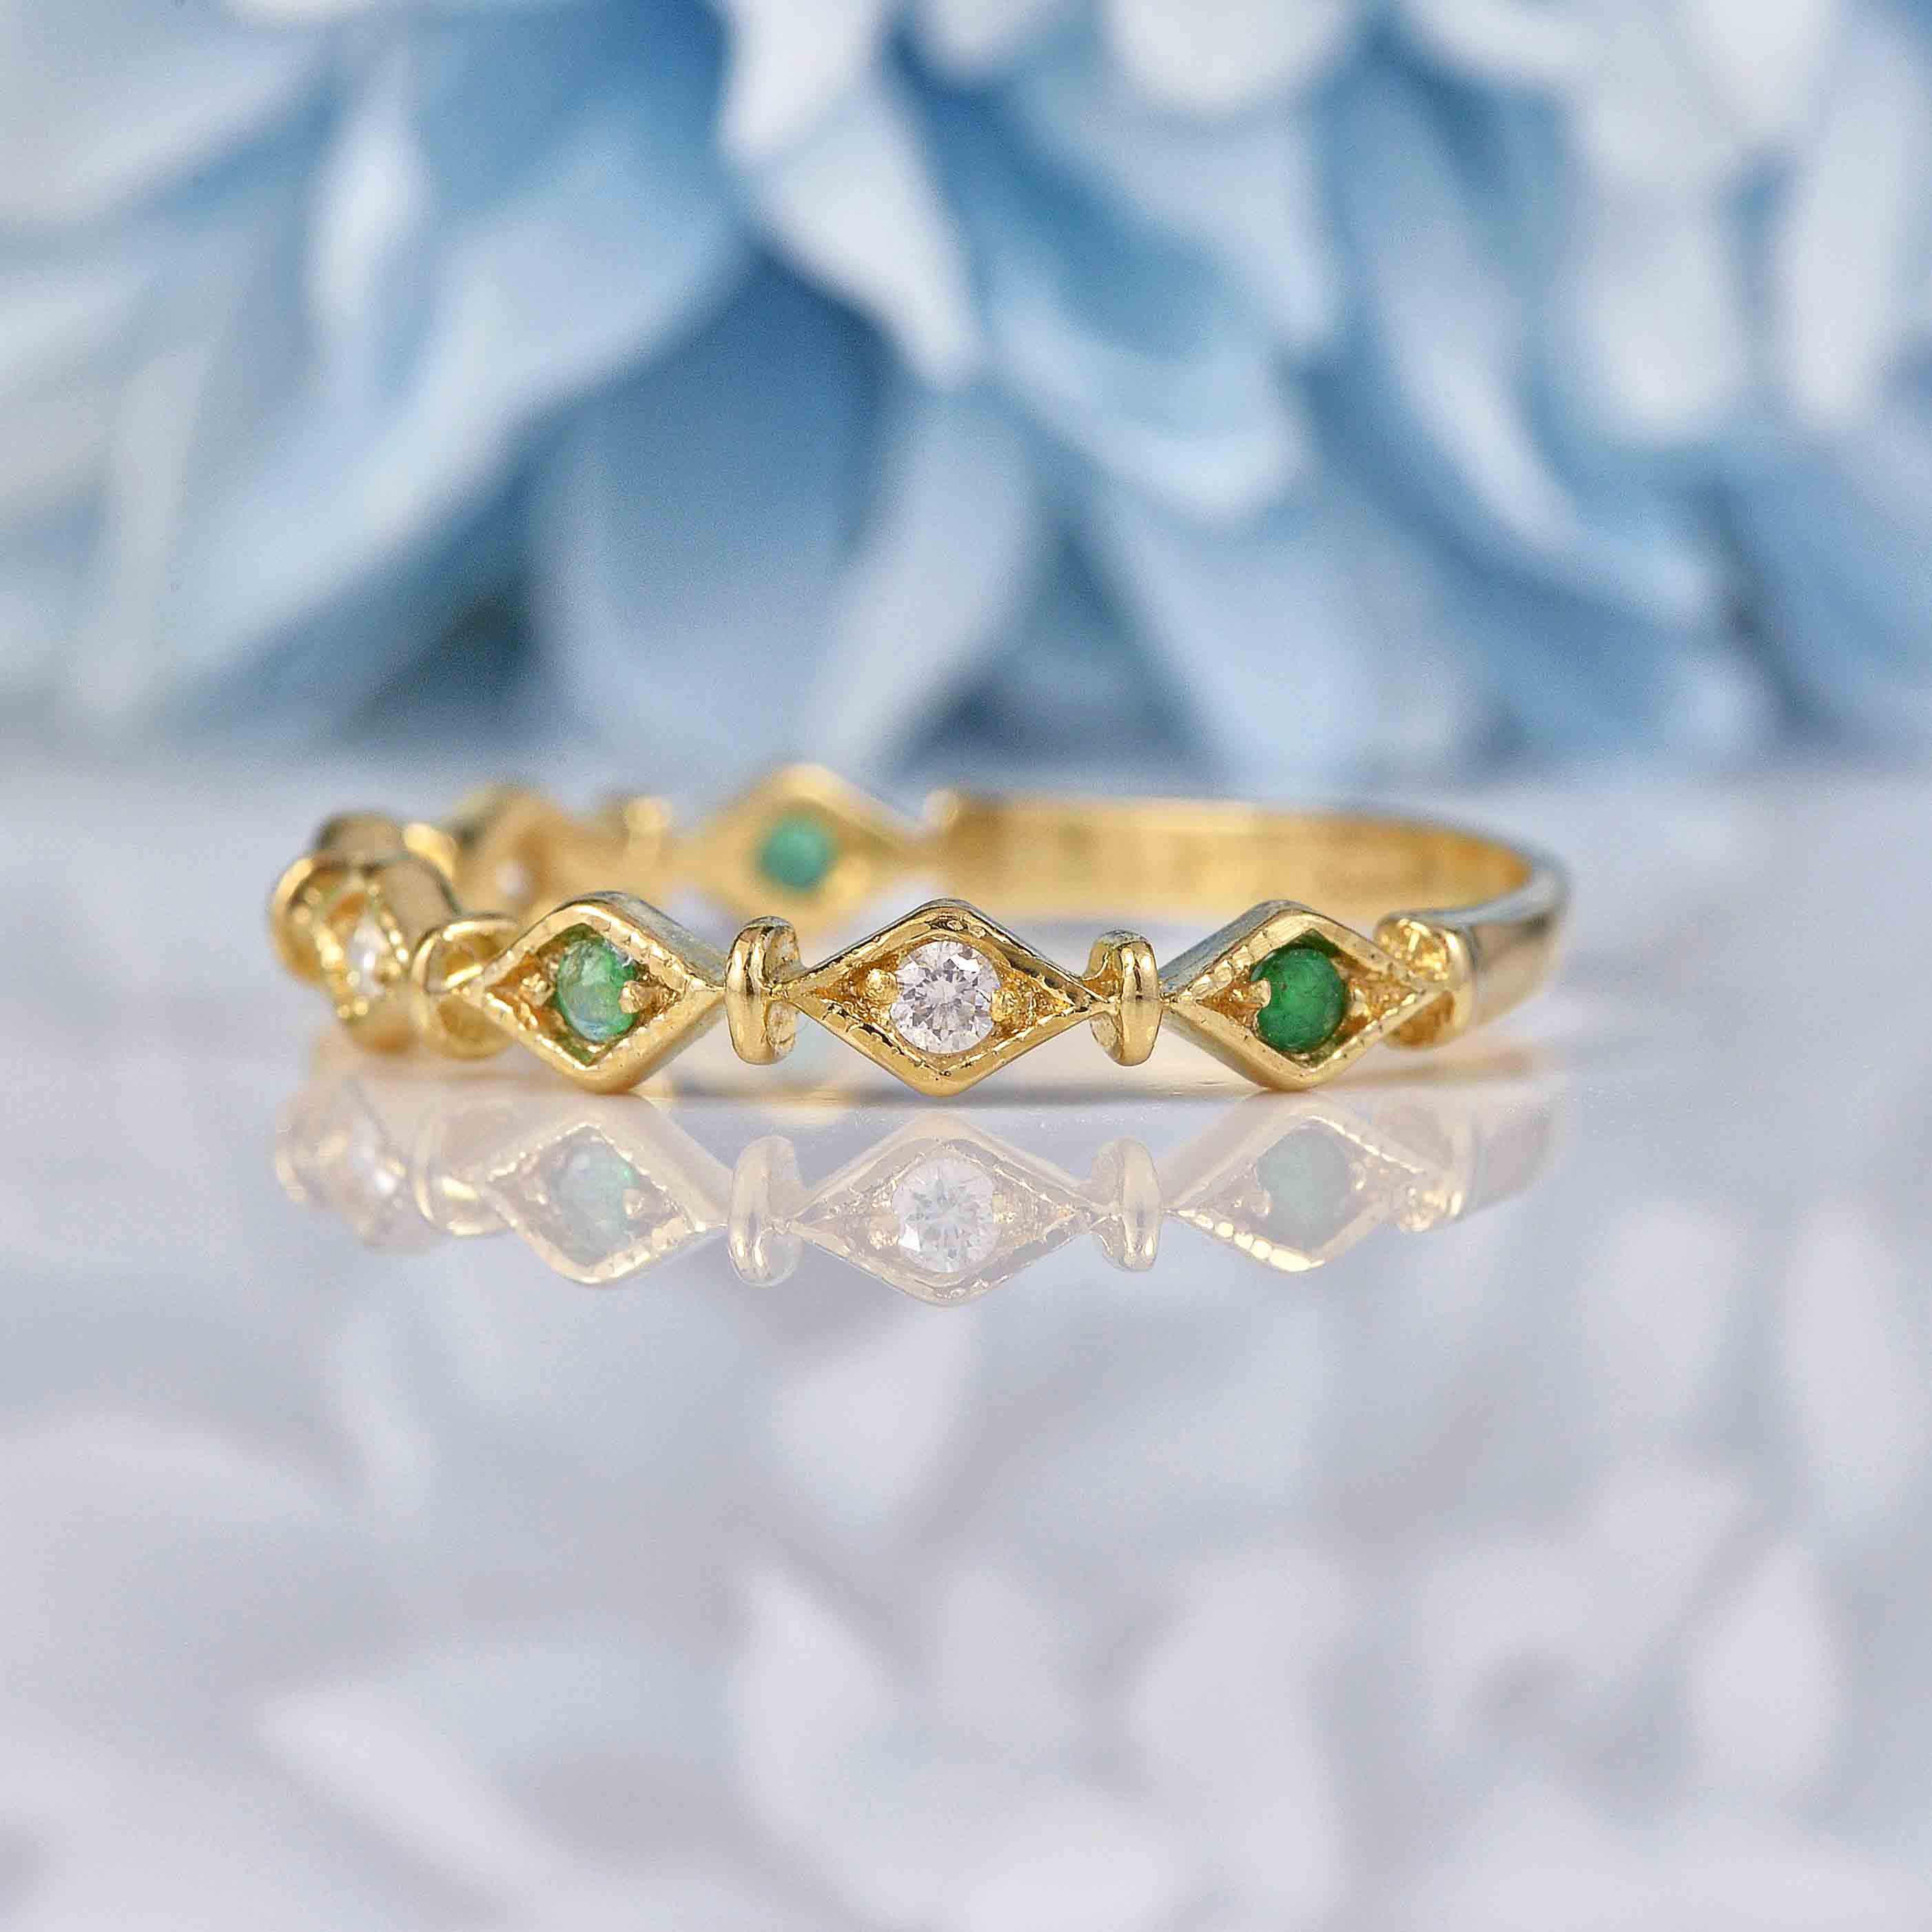 Ellibelle Jewellery Emerald & Diamond 9ct Gold Stacking Band Ring